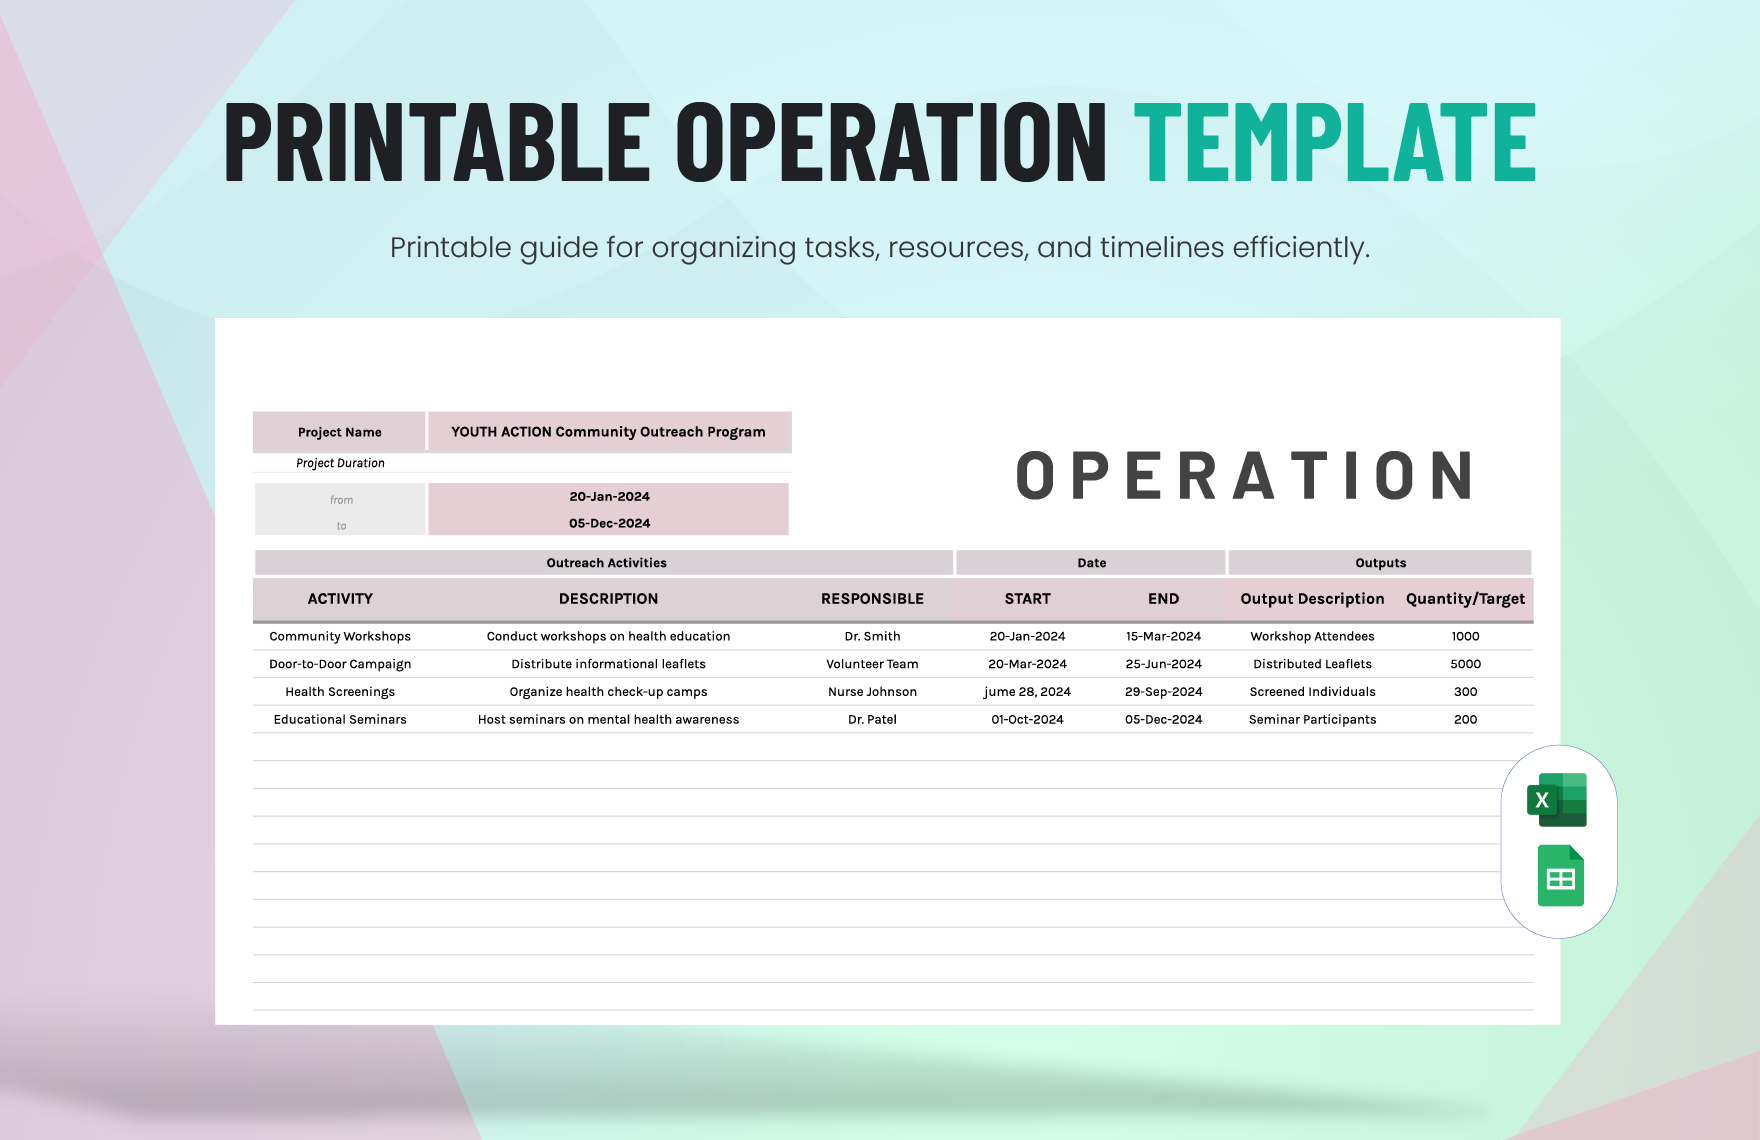 Printable Operation Template in Excel, Google Sheets